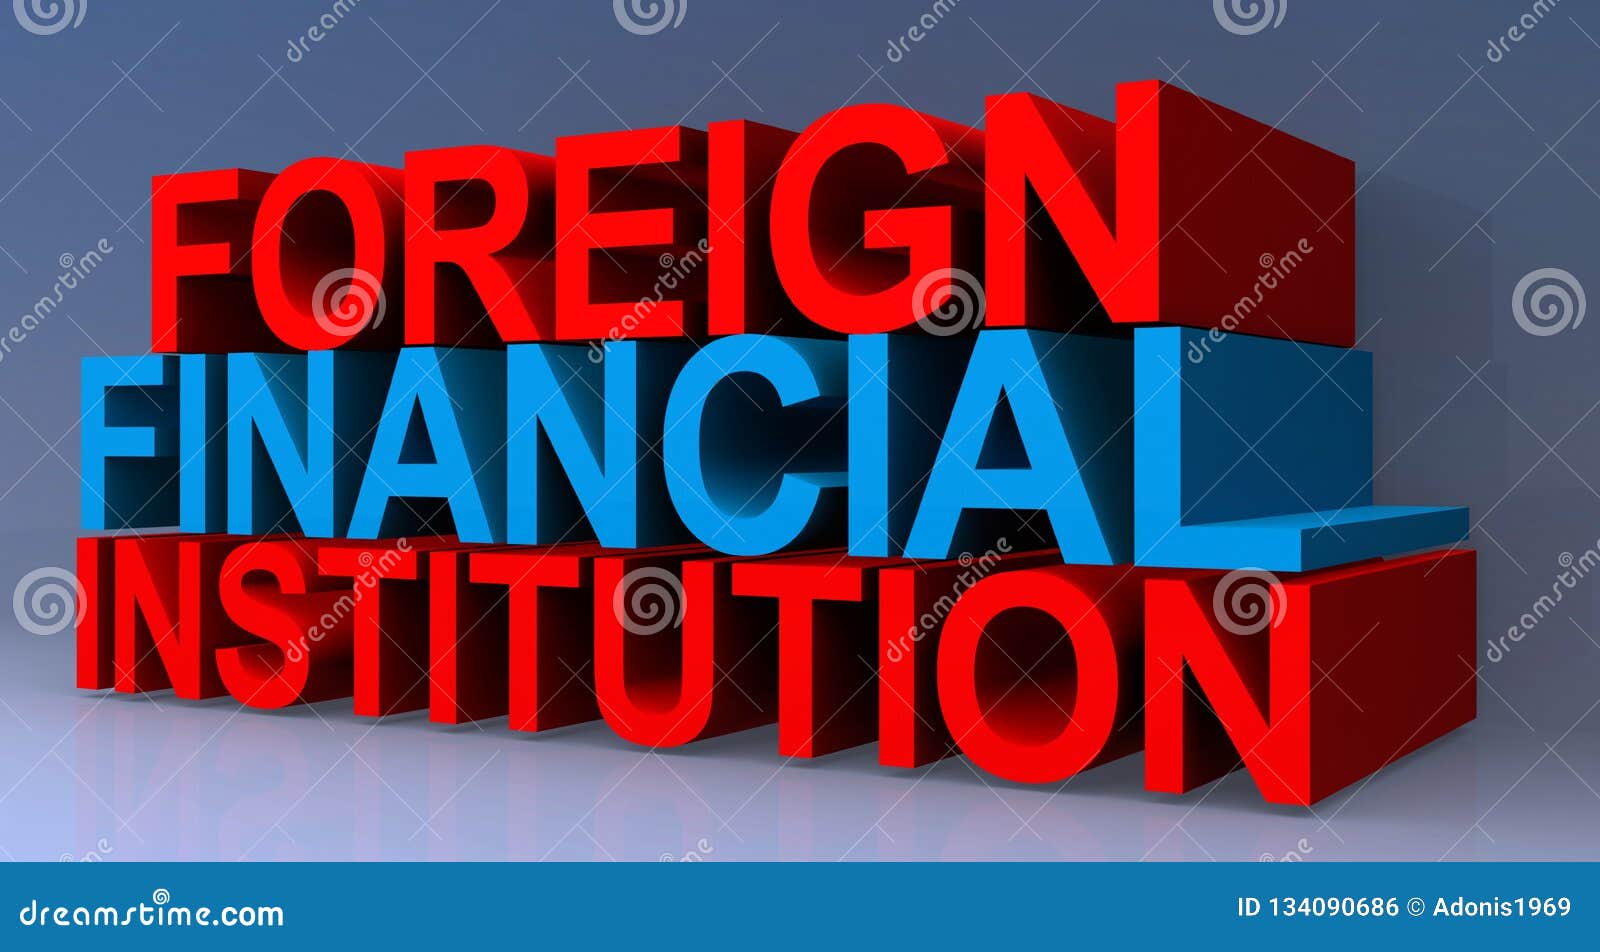 foreign financial institution